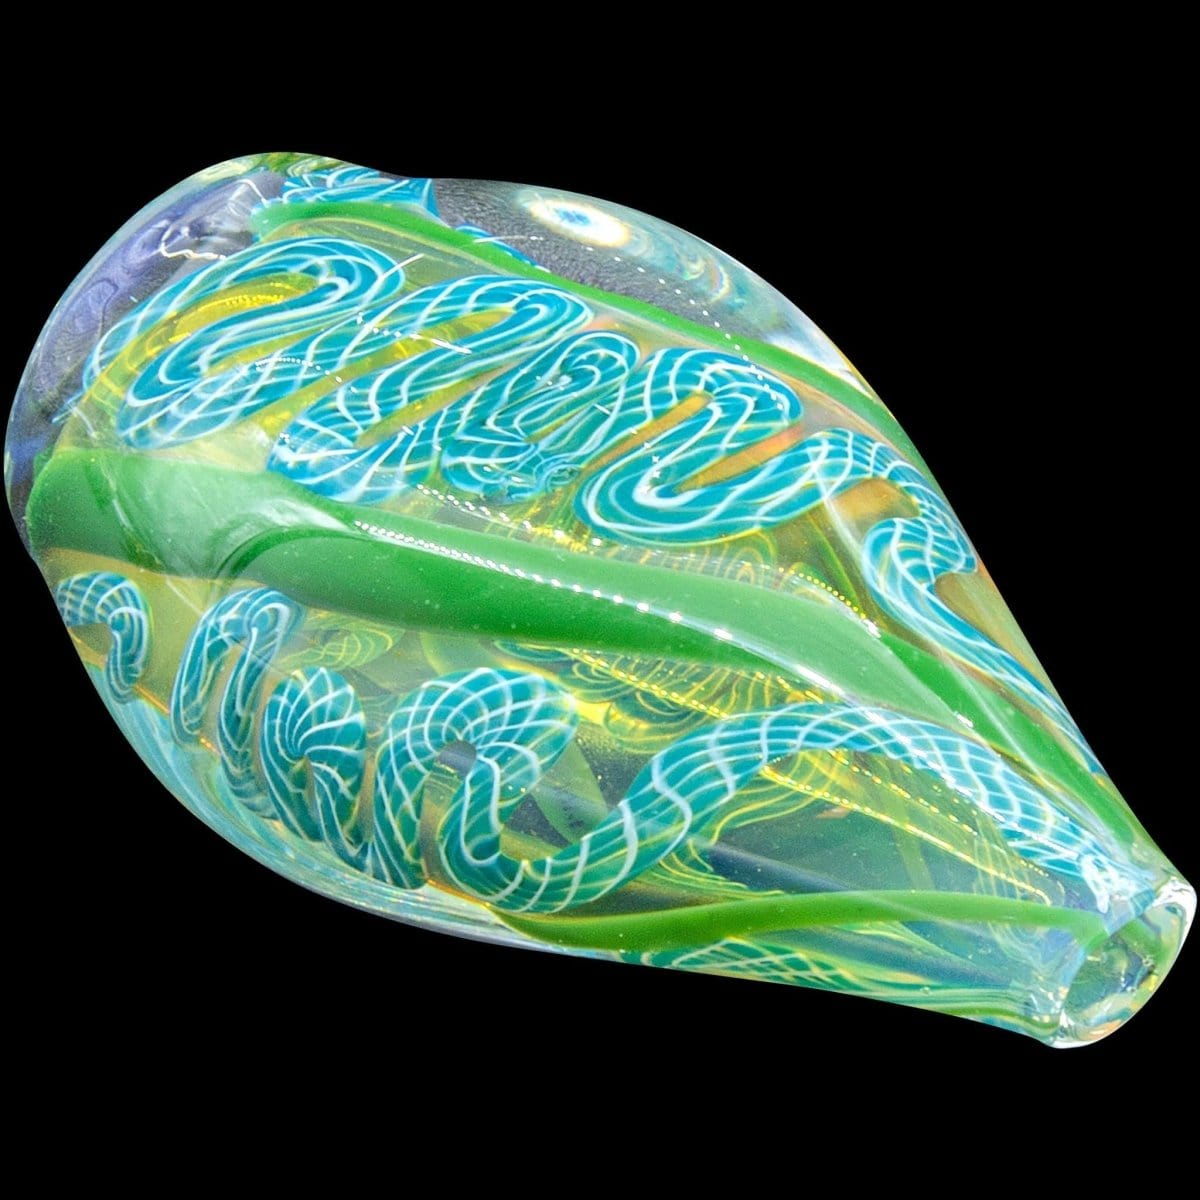 LA Pipes Hand Pipe Green Hues "Skipping Stone" Inside-Out Chillum